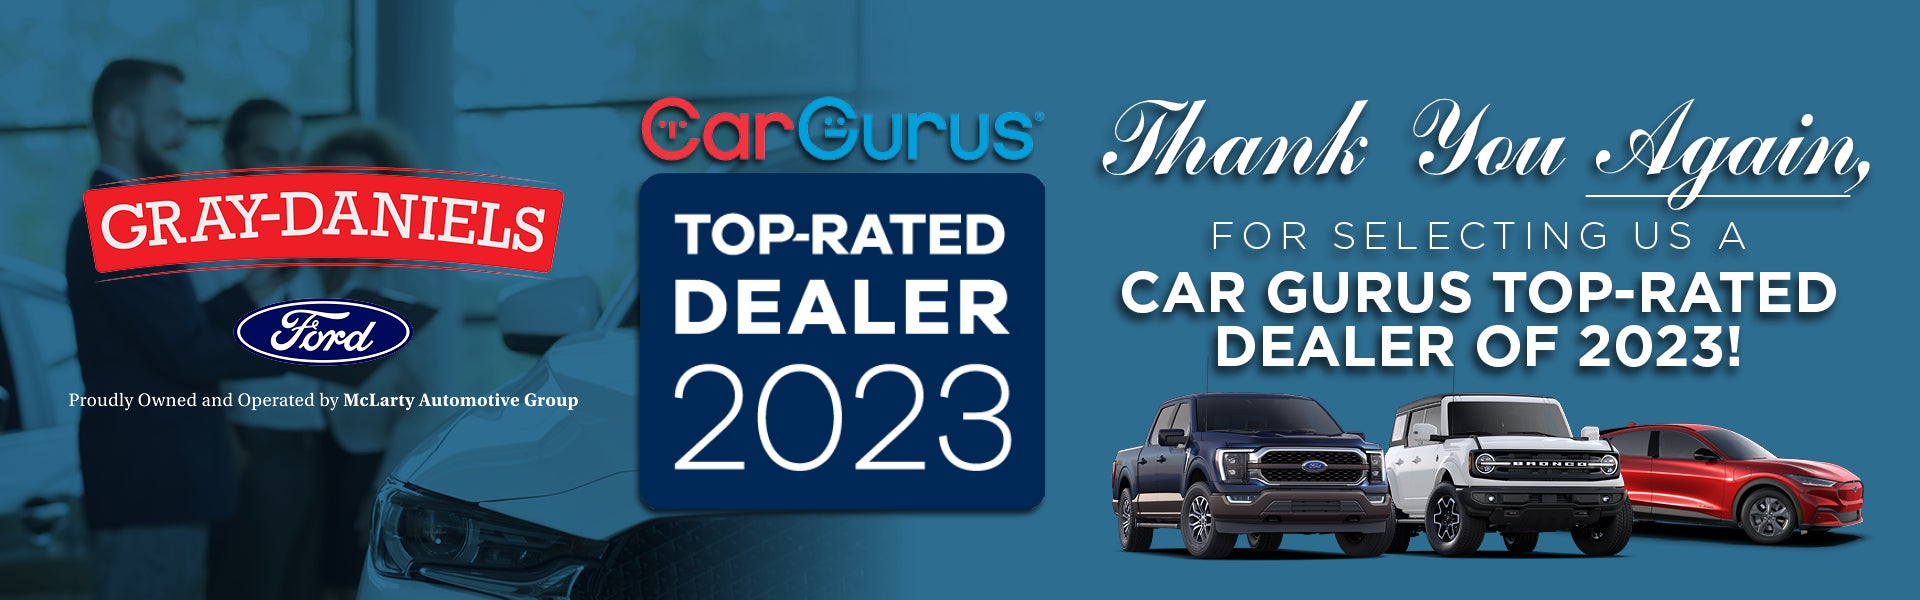 Top-Rated Dealer 2023